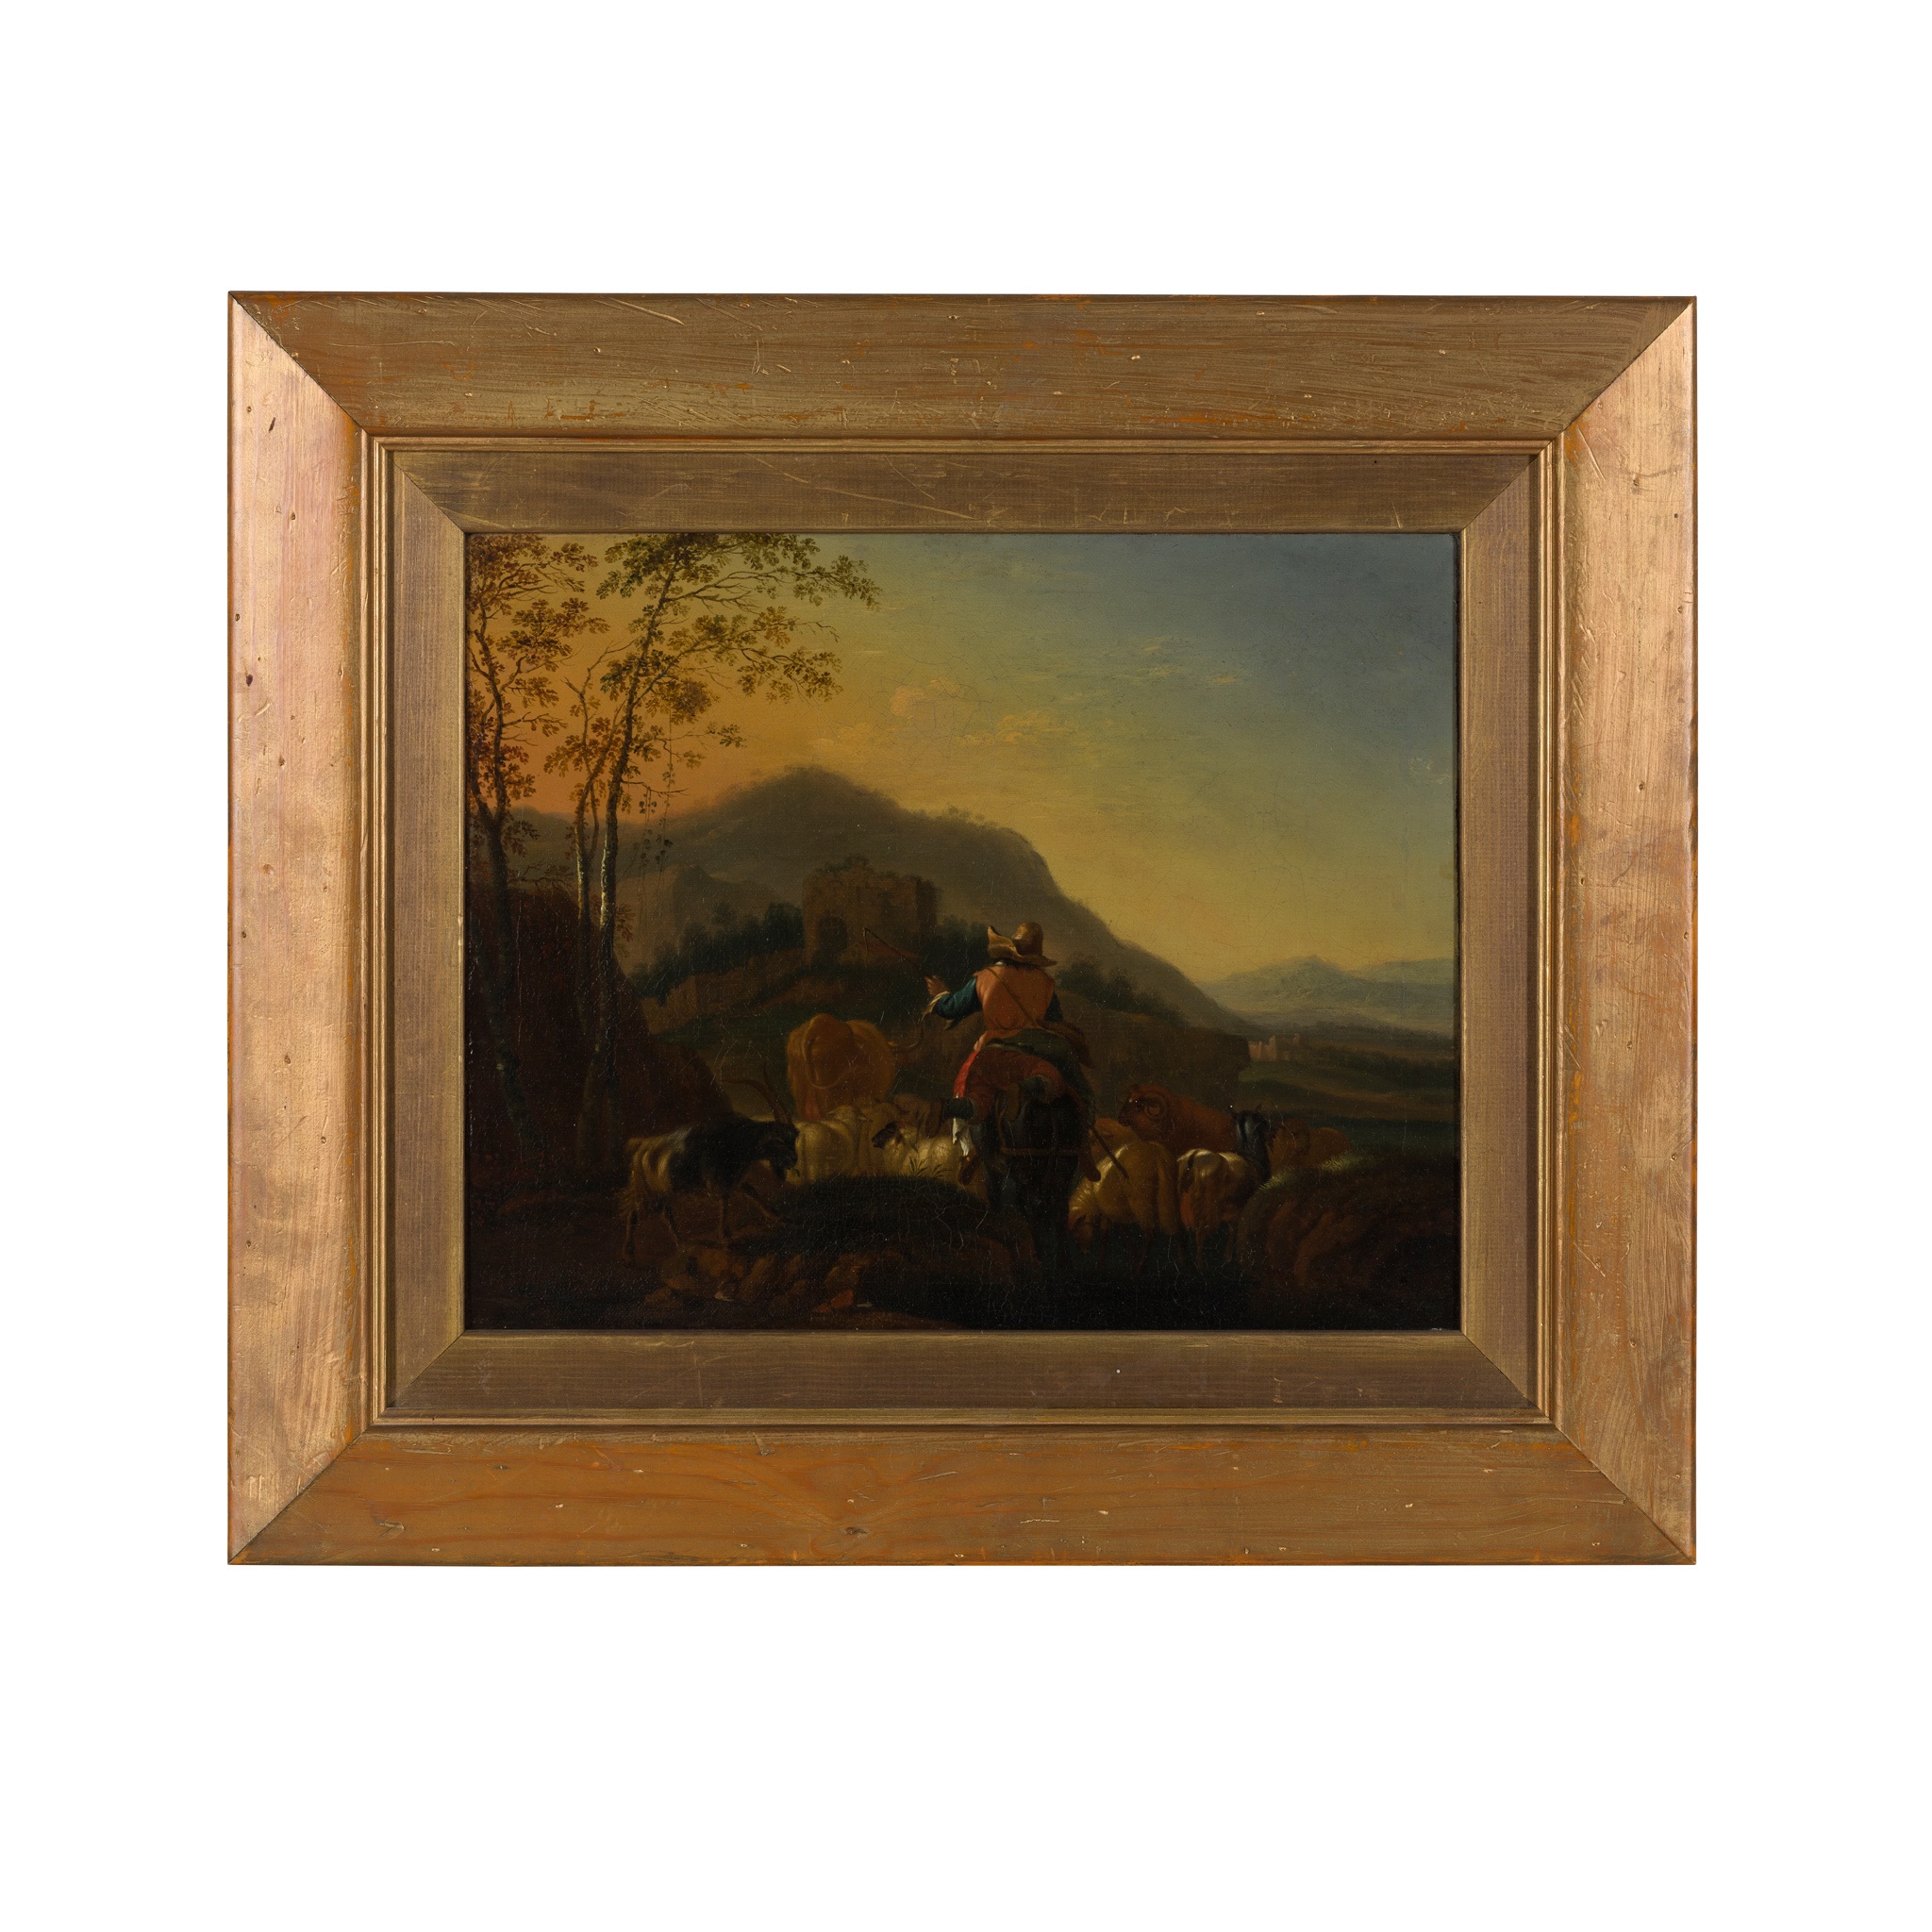 ITALO-DUTCH SCHOOL (17TH CENTURY) ITALIANATE LANDSCAPE WITH A PEASANT AND HIS STOCK - Image 2 of 2